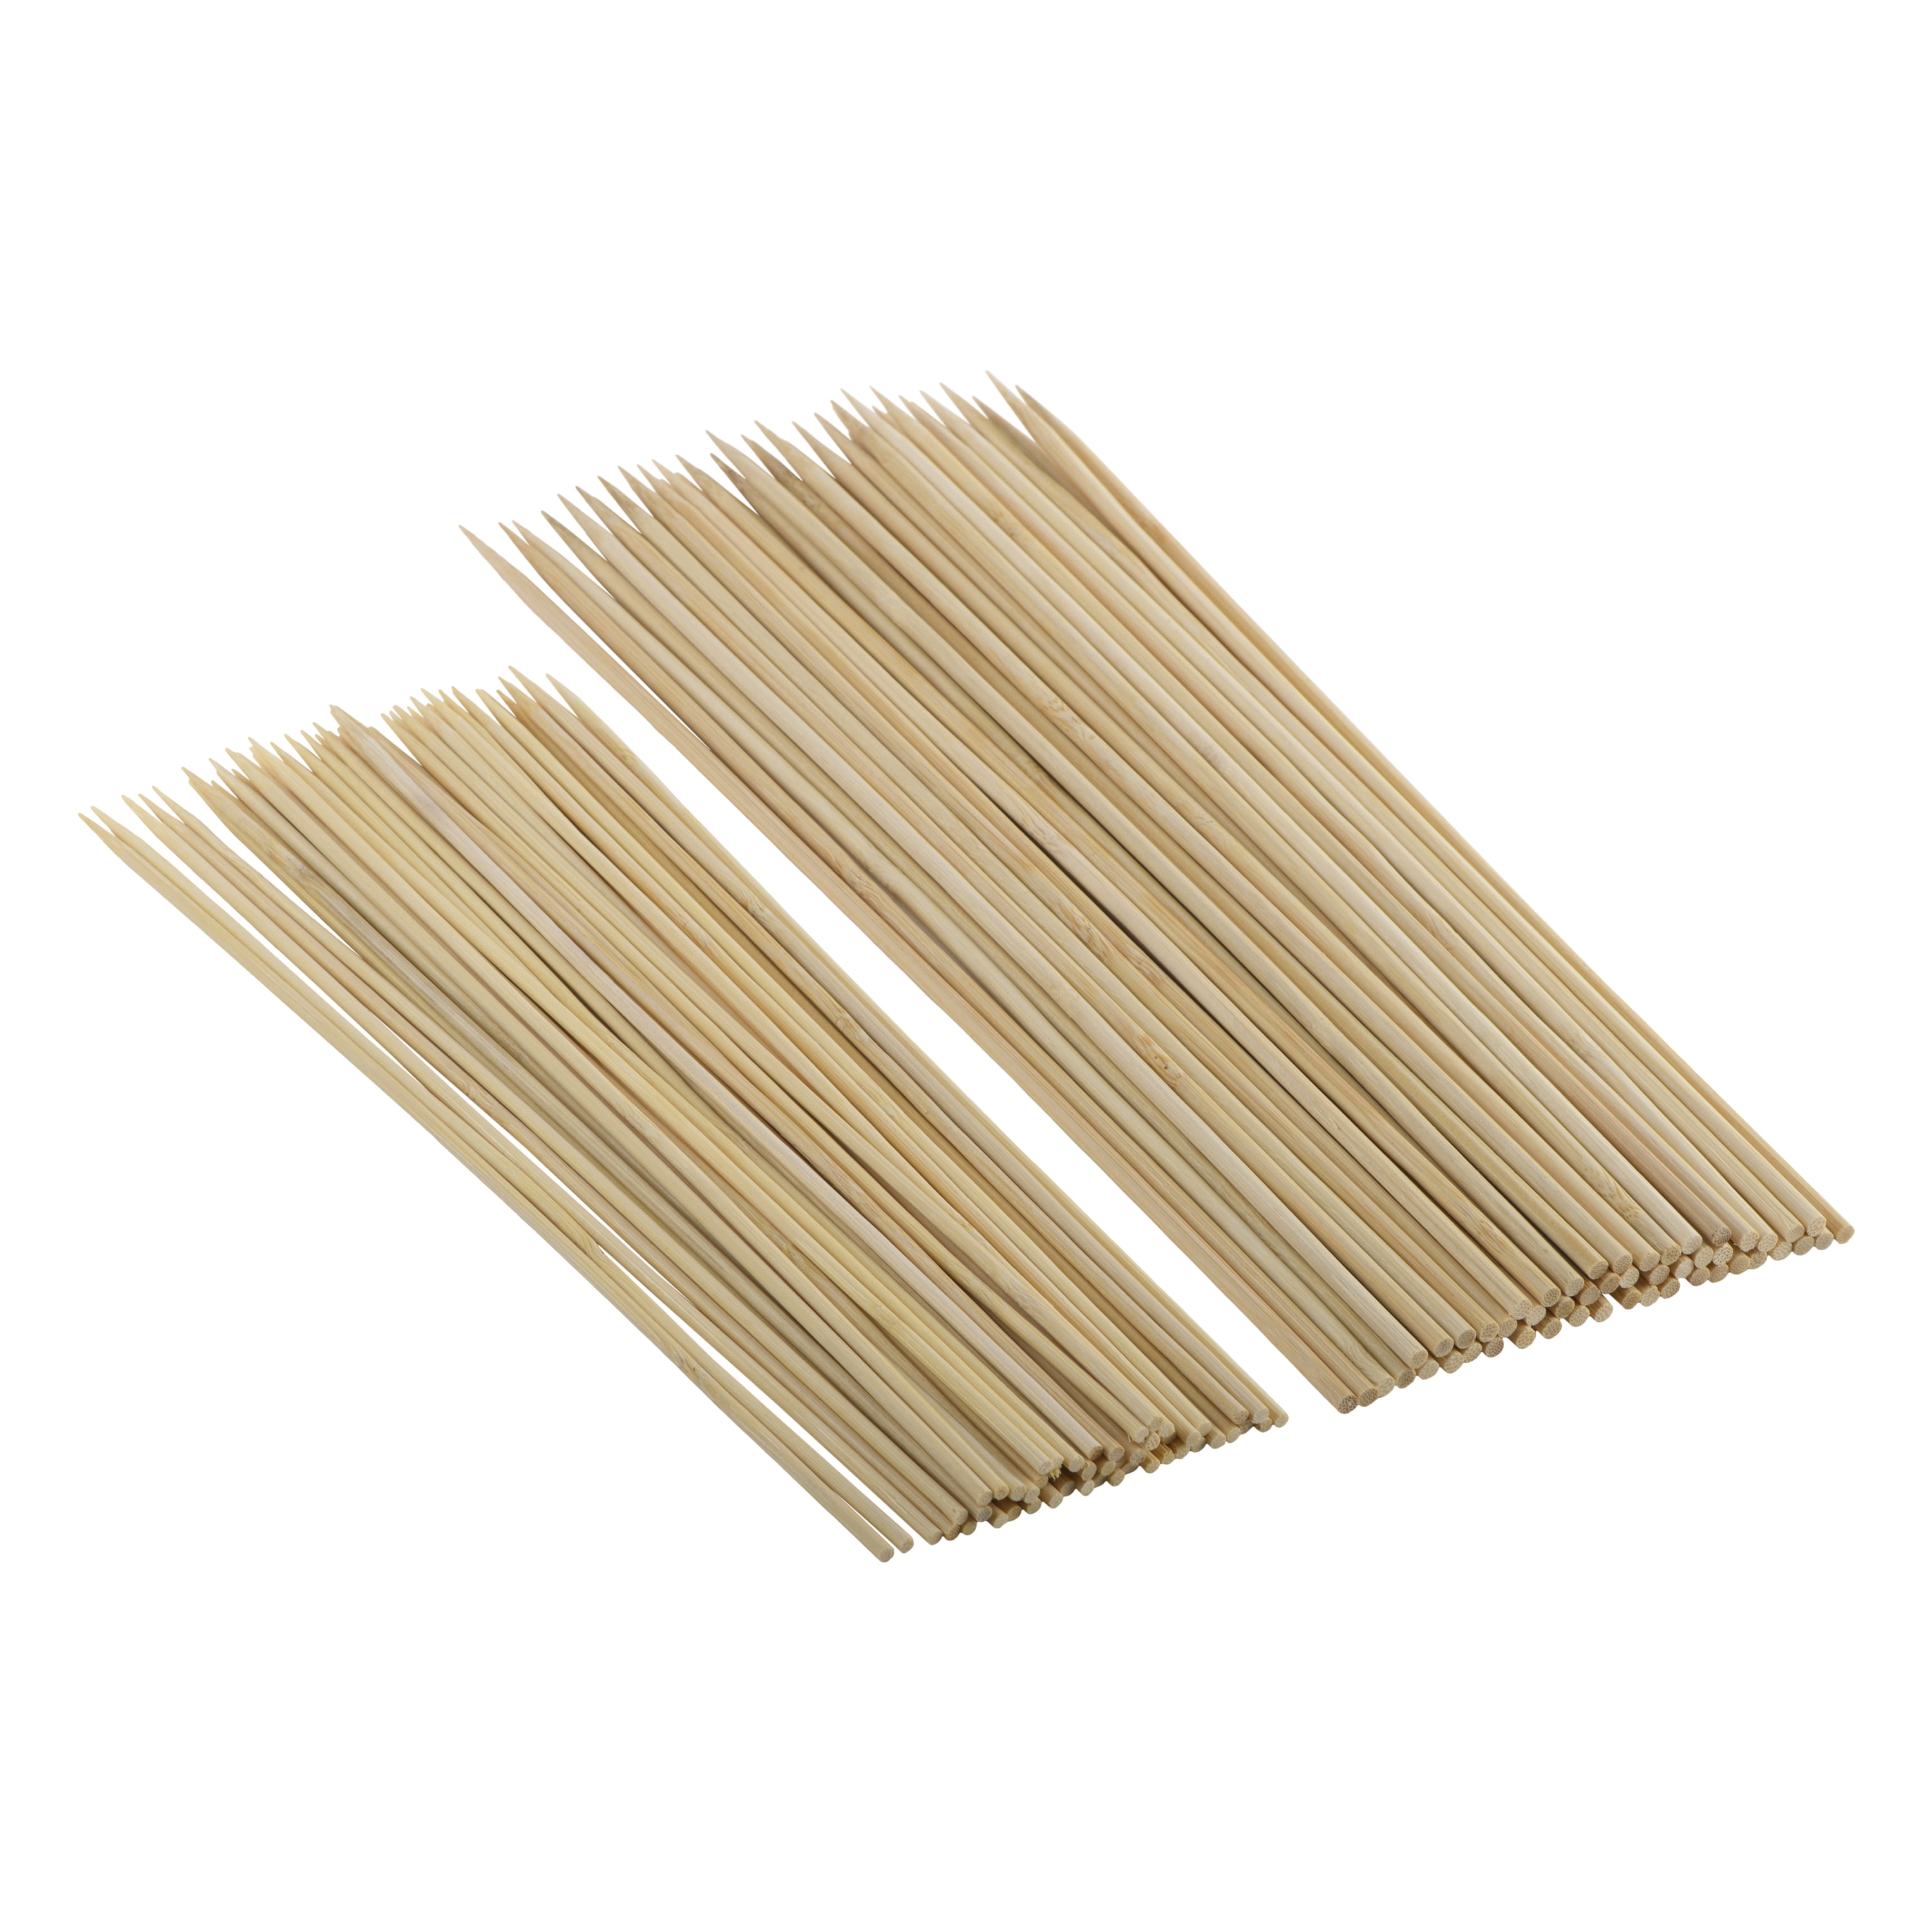  DecorRack 400 Natural Bamboo Skewer Sticks, Natural Wood  Barbecue Skewers for Grilling, Kabob, Fruit, Appetizers, Cocktail, Brunch,  Chocolate Fountain, BBQ Skewers, 12 inch (Pack of 400) : Patio, Lawn &  Garden